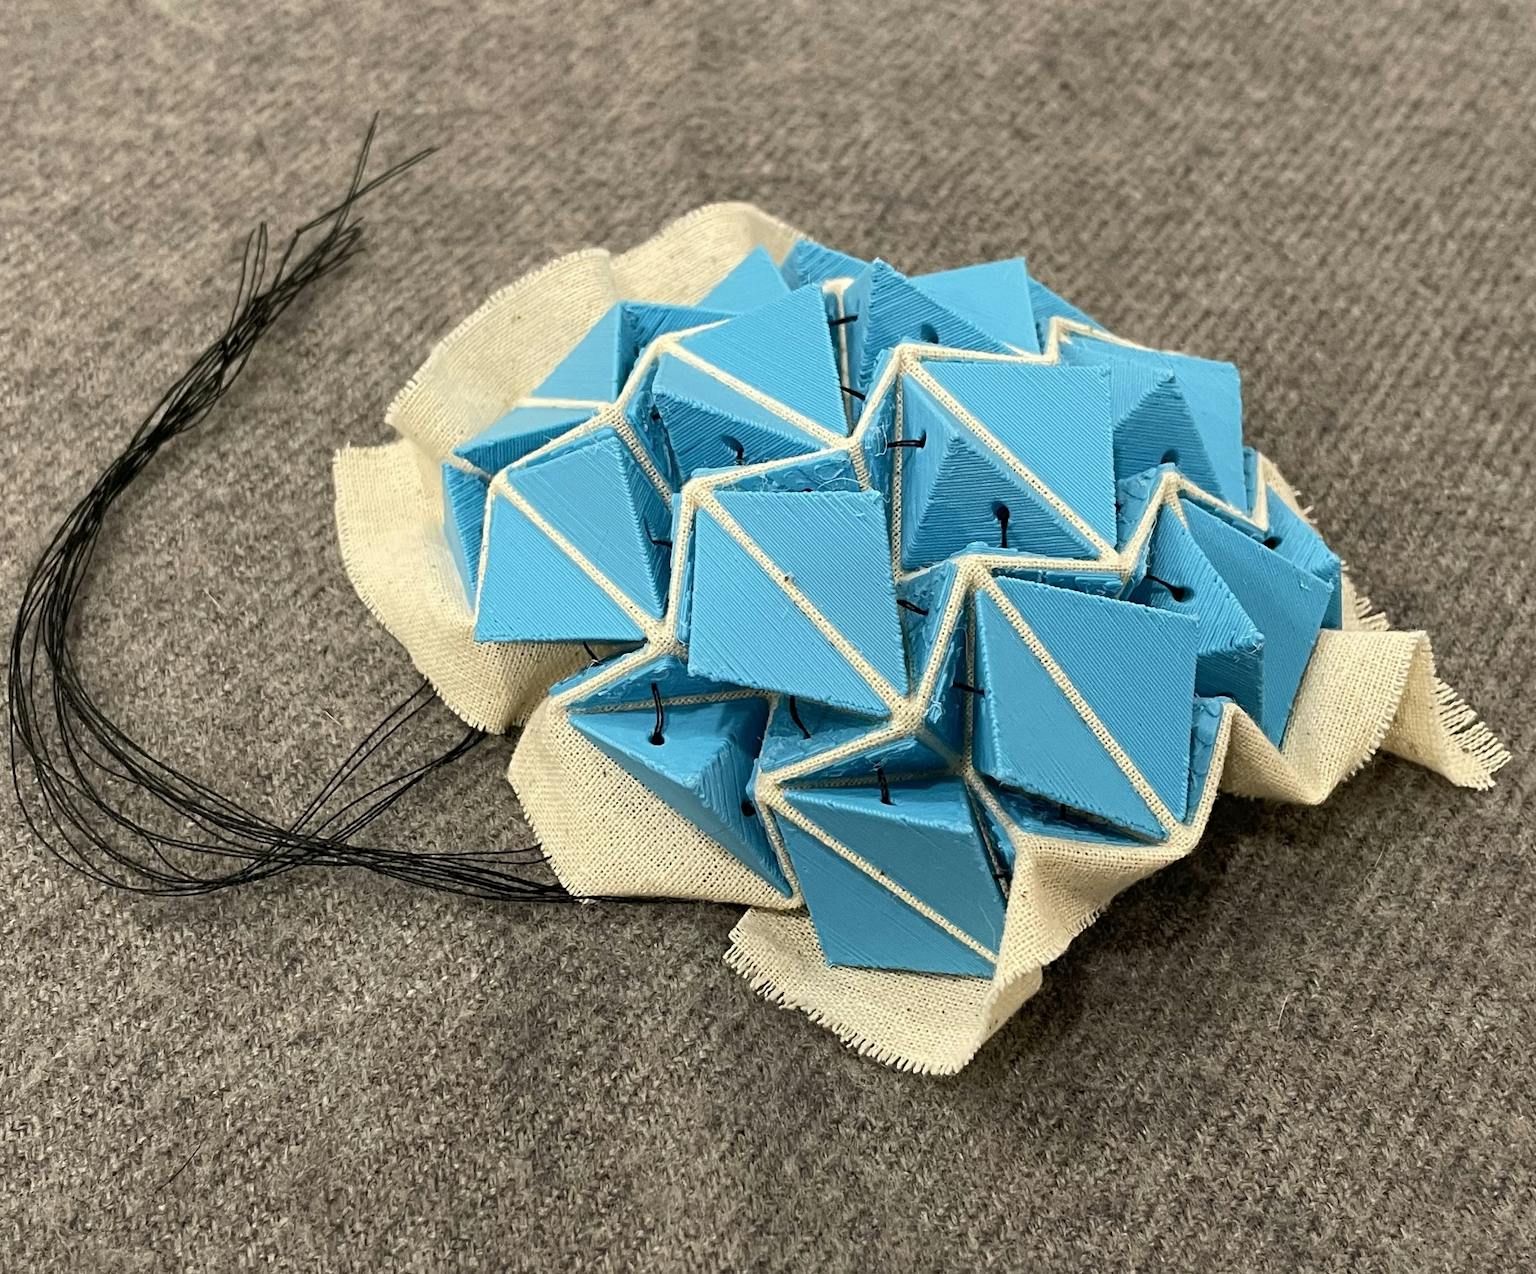 Image for entry '3-D Printed Waterbomb Tessellation'